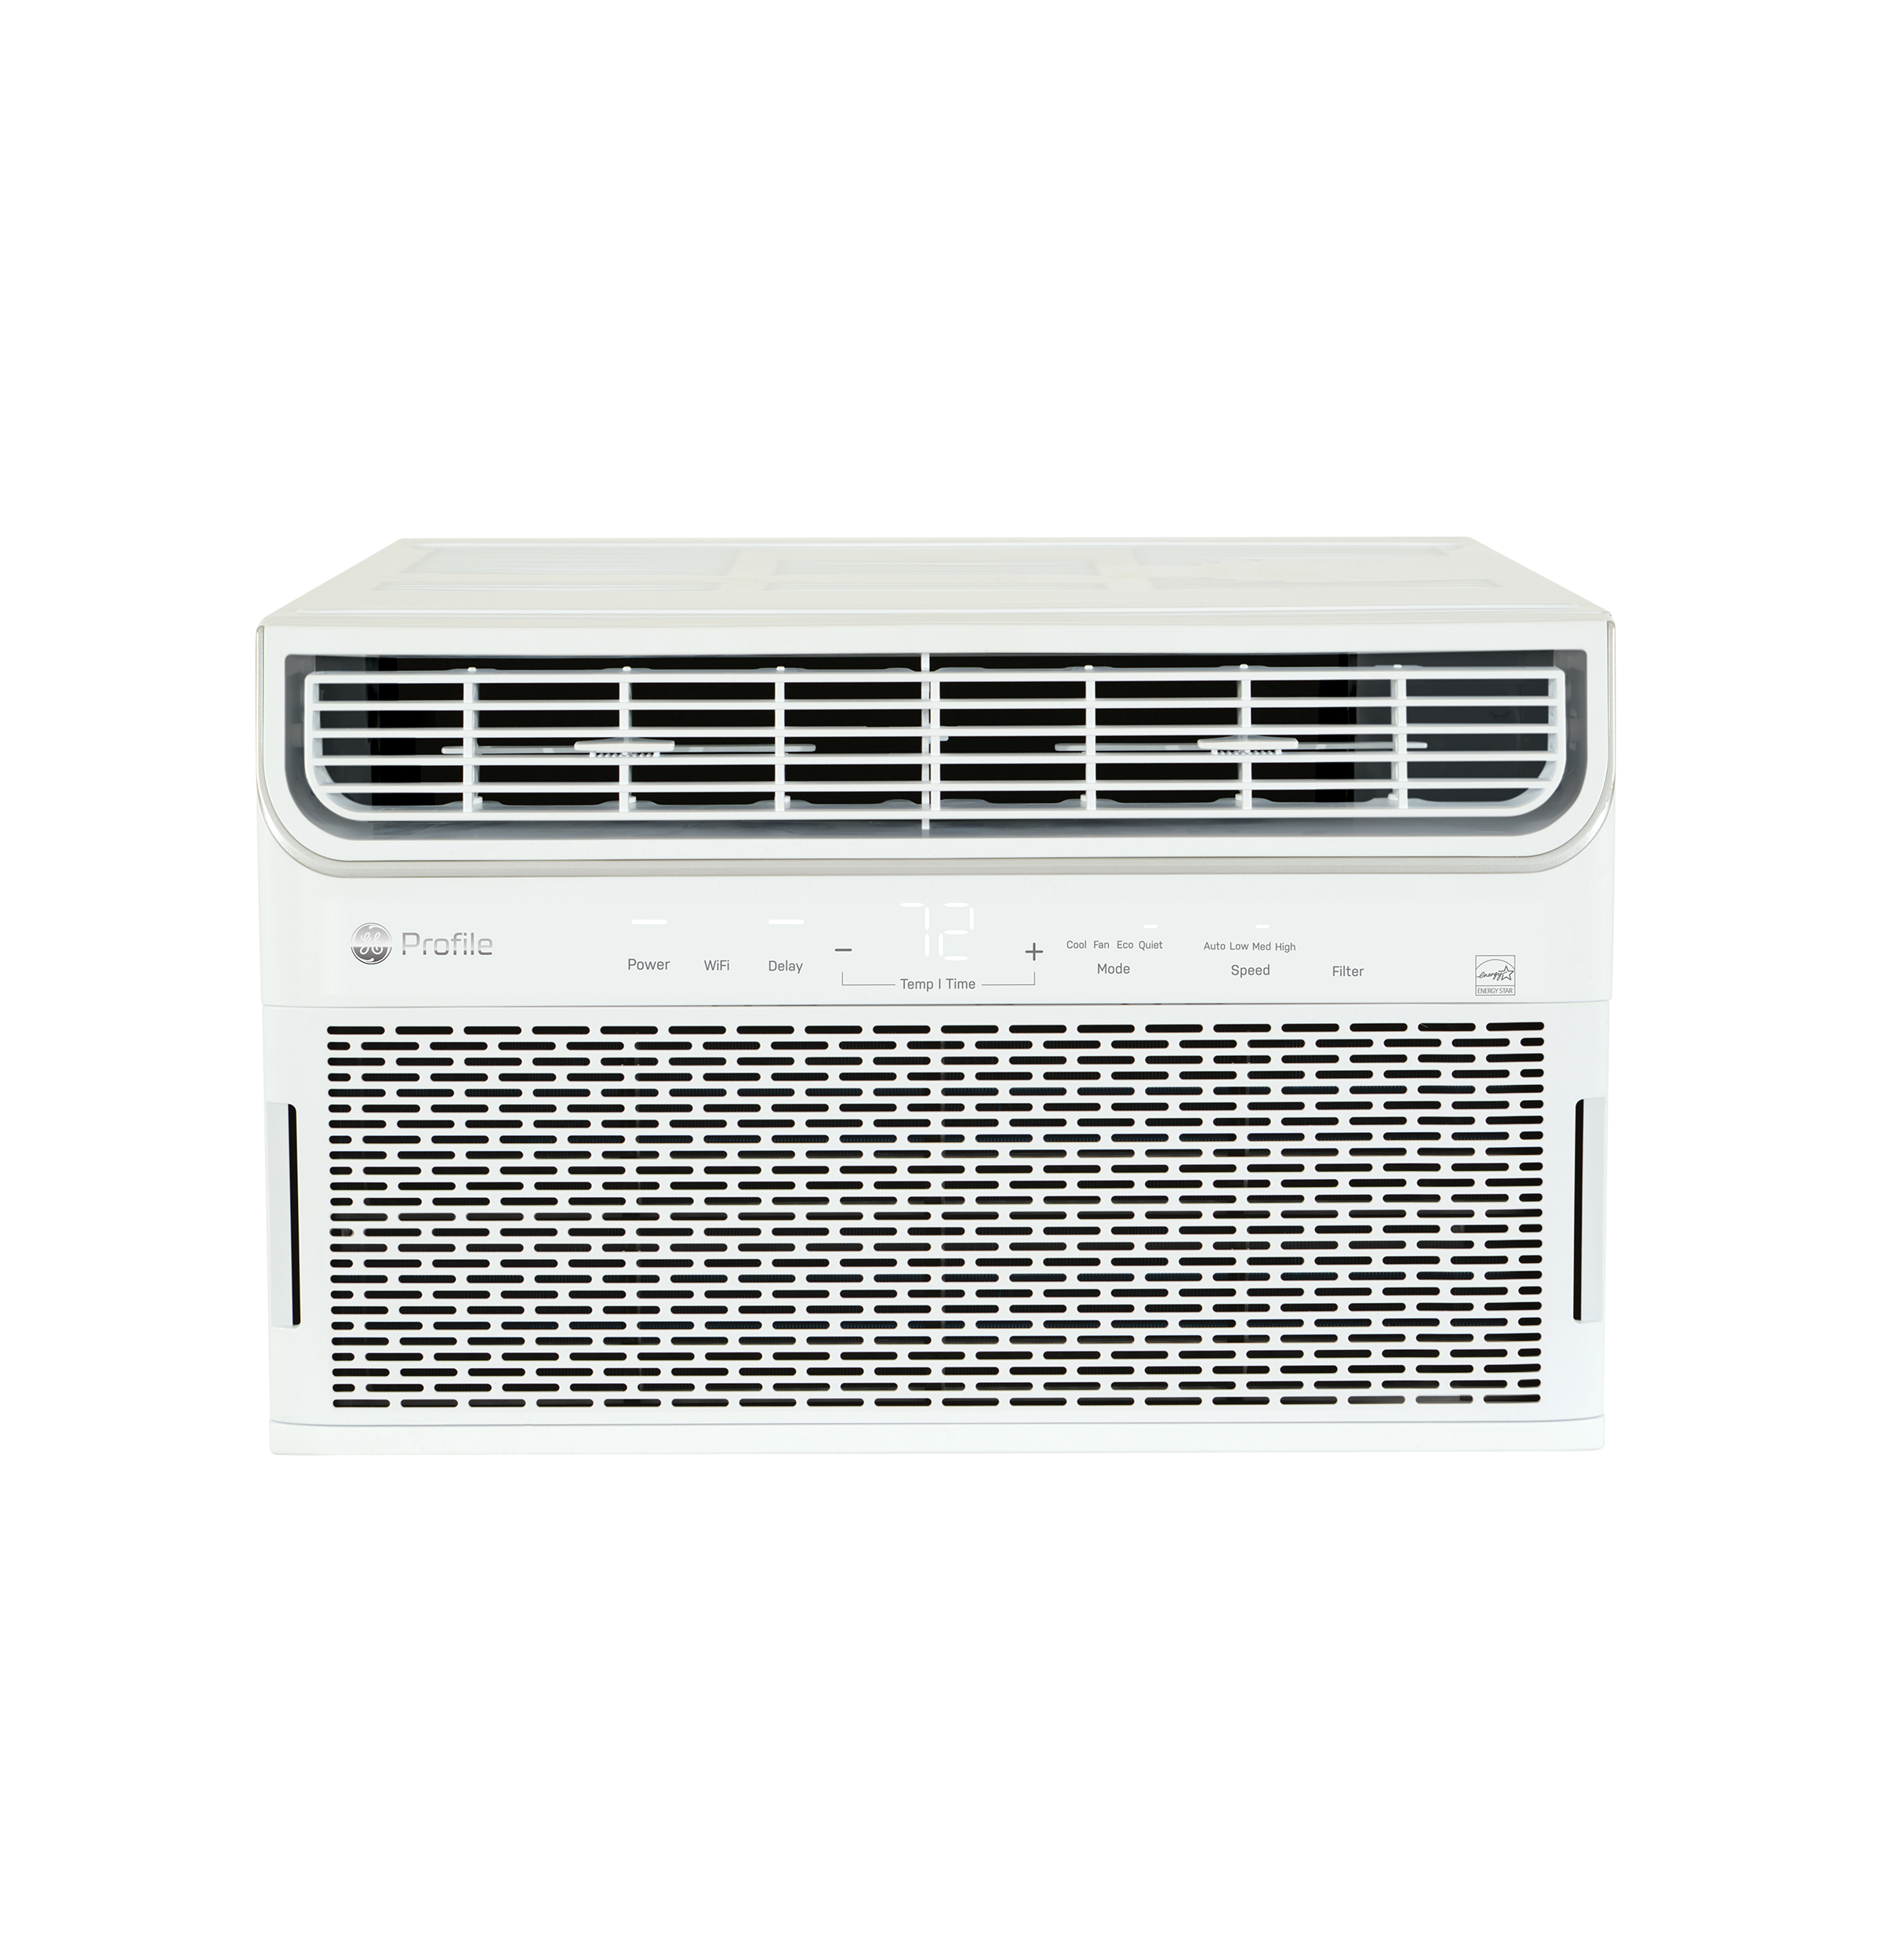 GE Profile™ ENERGY STAR® 12,000 BTU Inverter Smart Ultra Quiet Window Air Conditioner for Large Rooms up to 550 sq. ft.